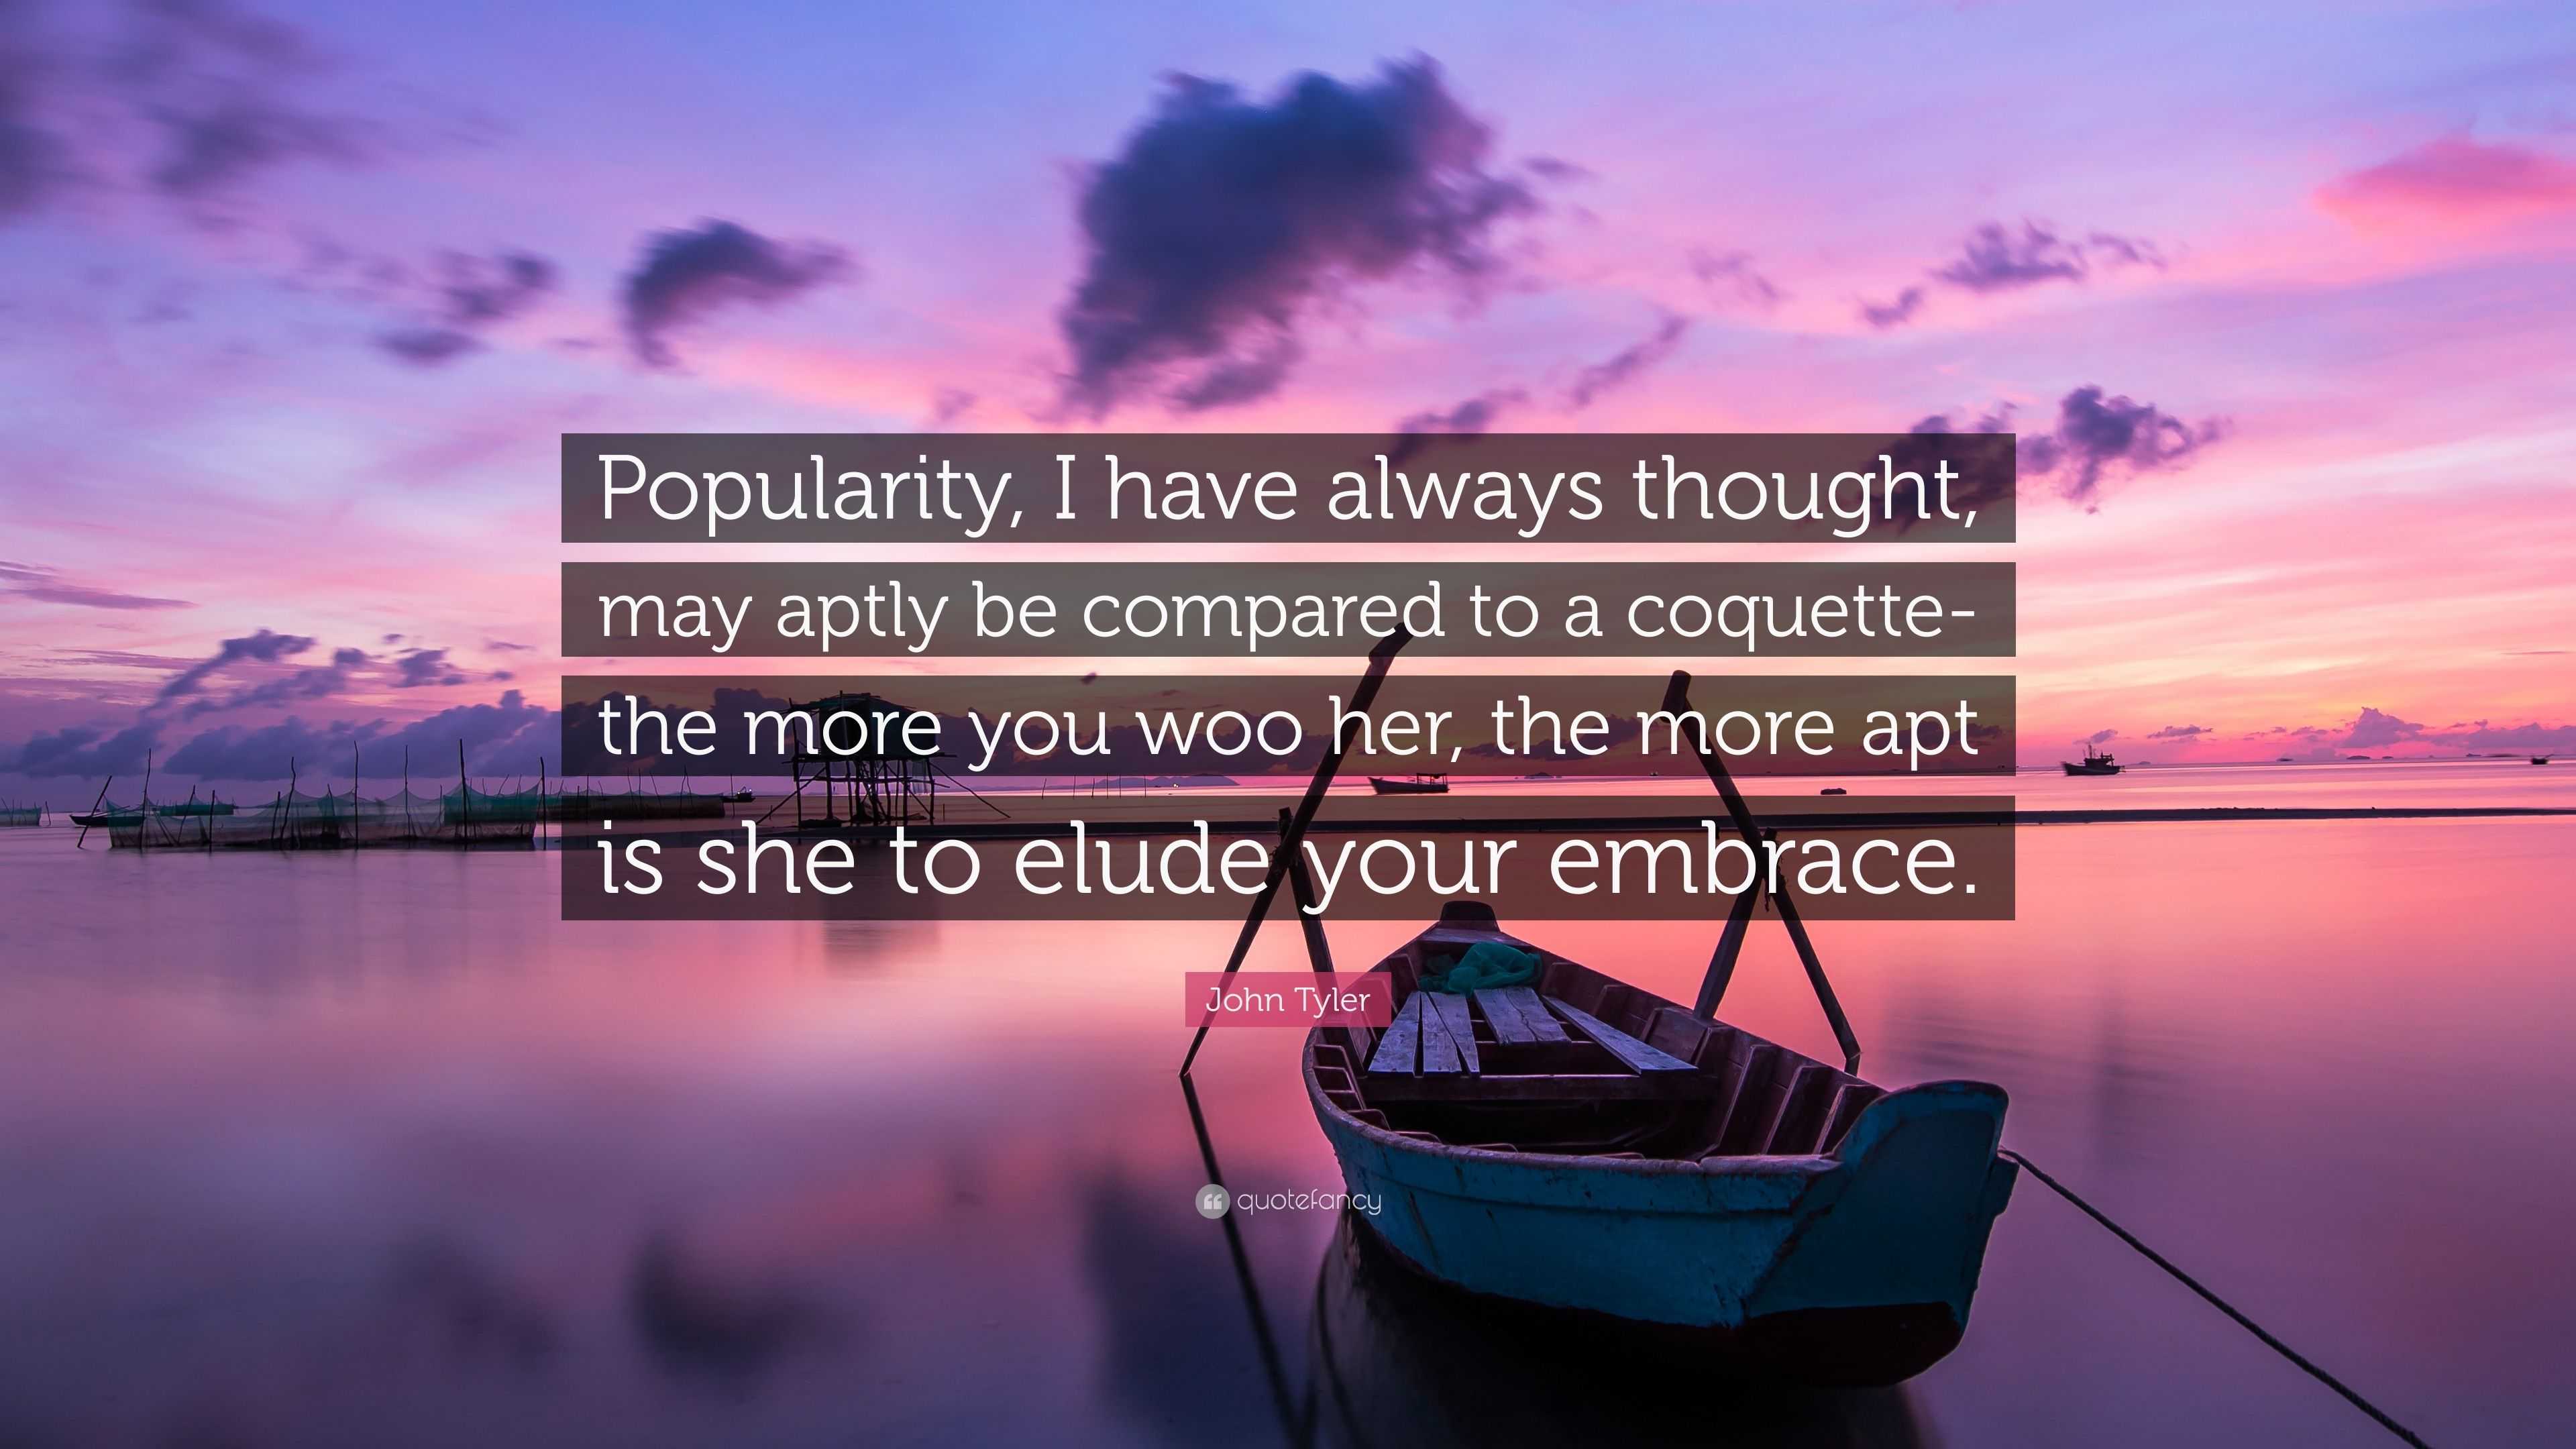 15+ Quotes About Popularity